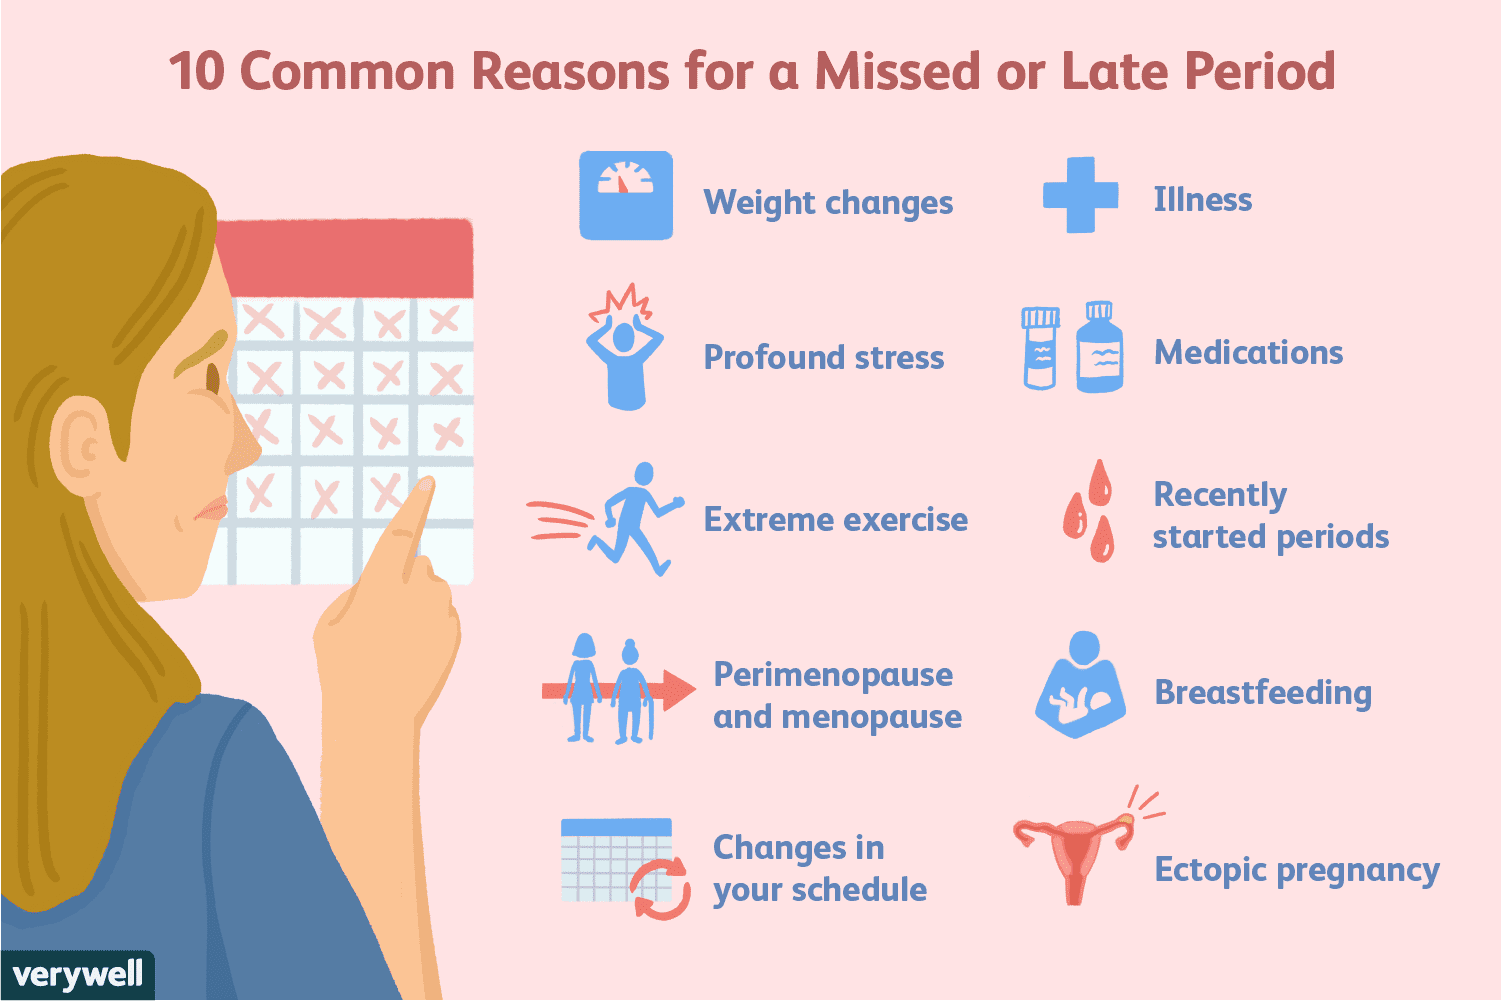 How Many Days Can Exercise Delay Your Period